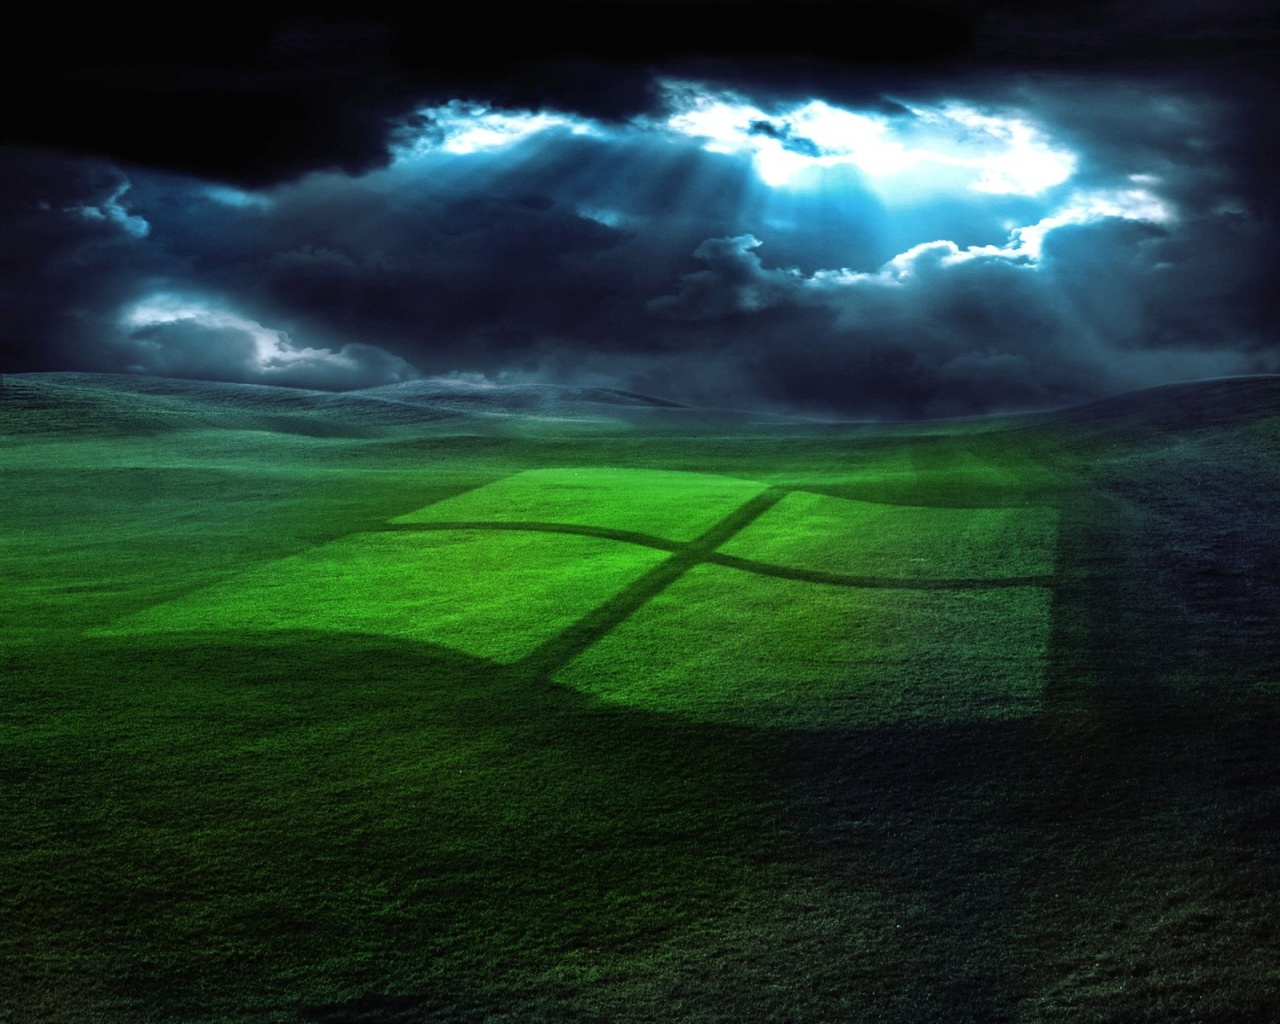 In Storm Windows XP 1280 x 1024 Download Close